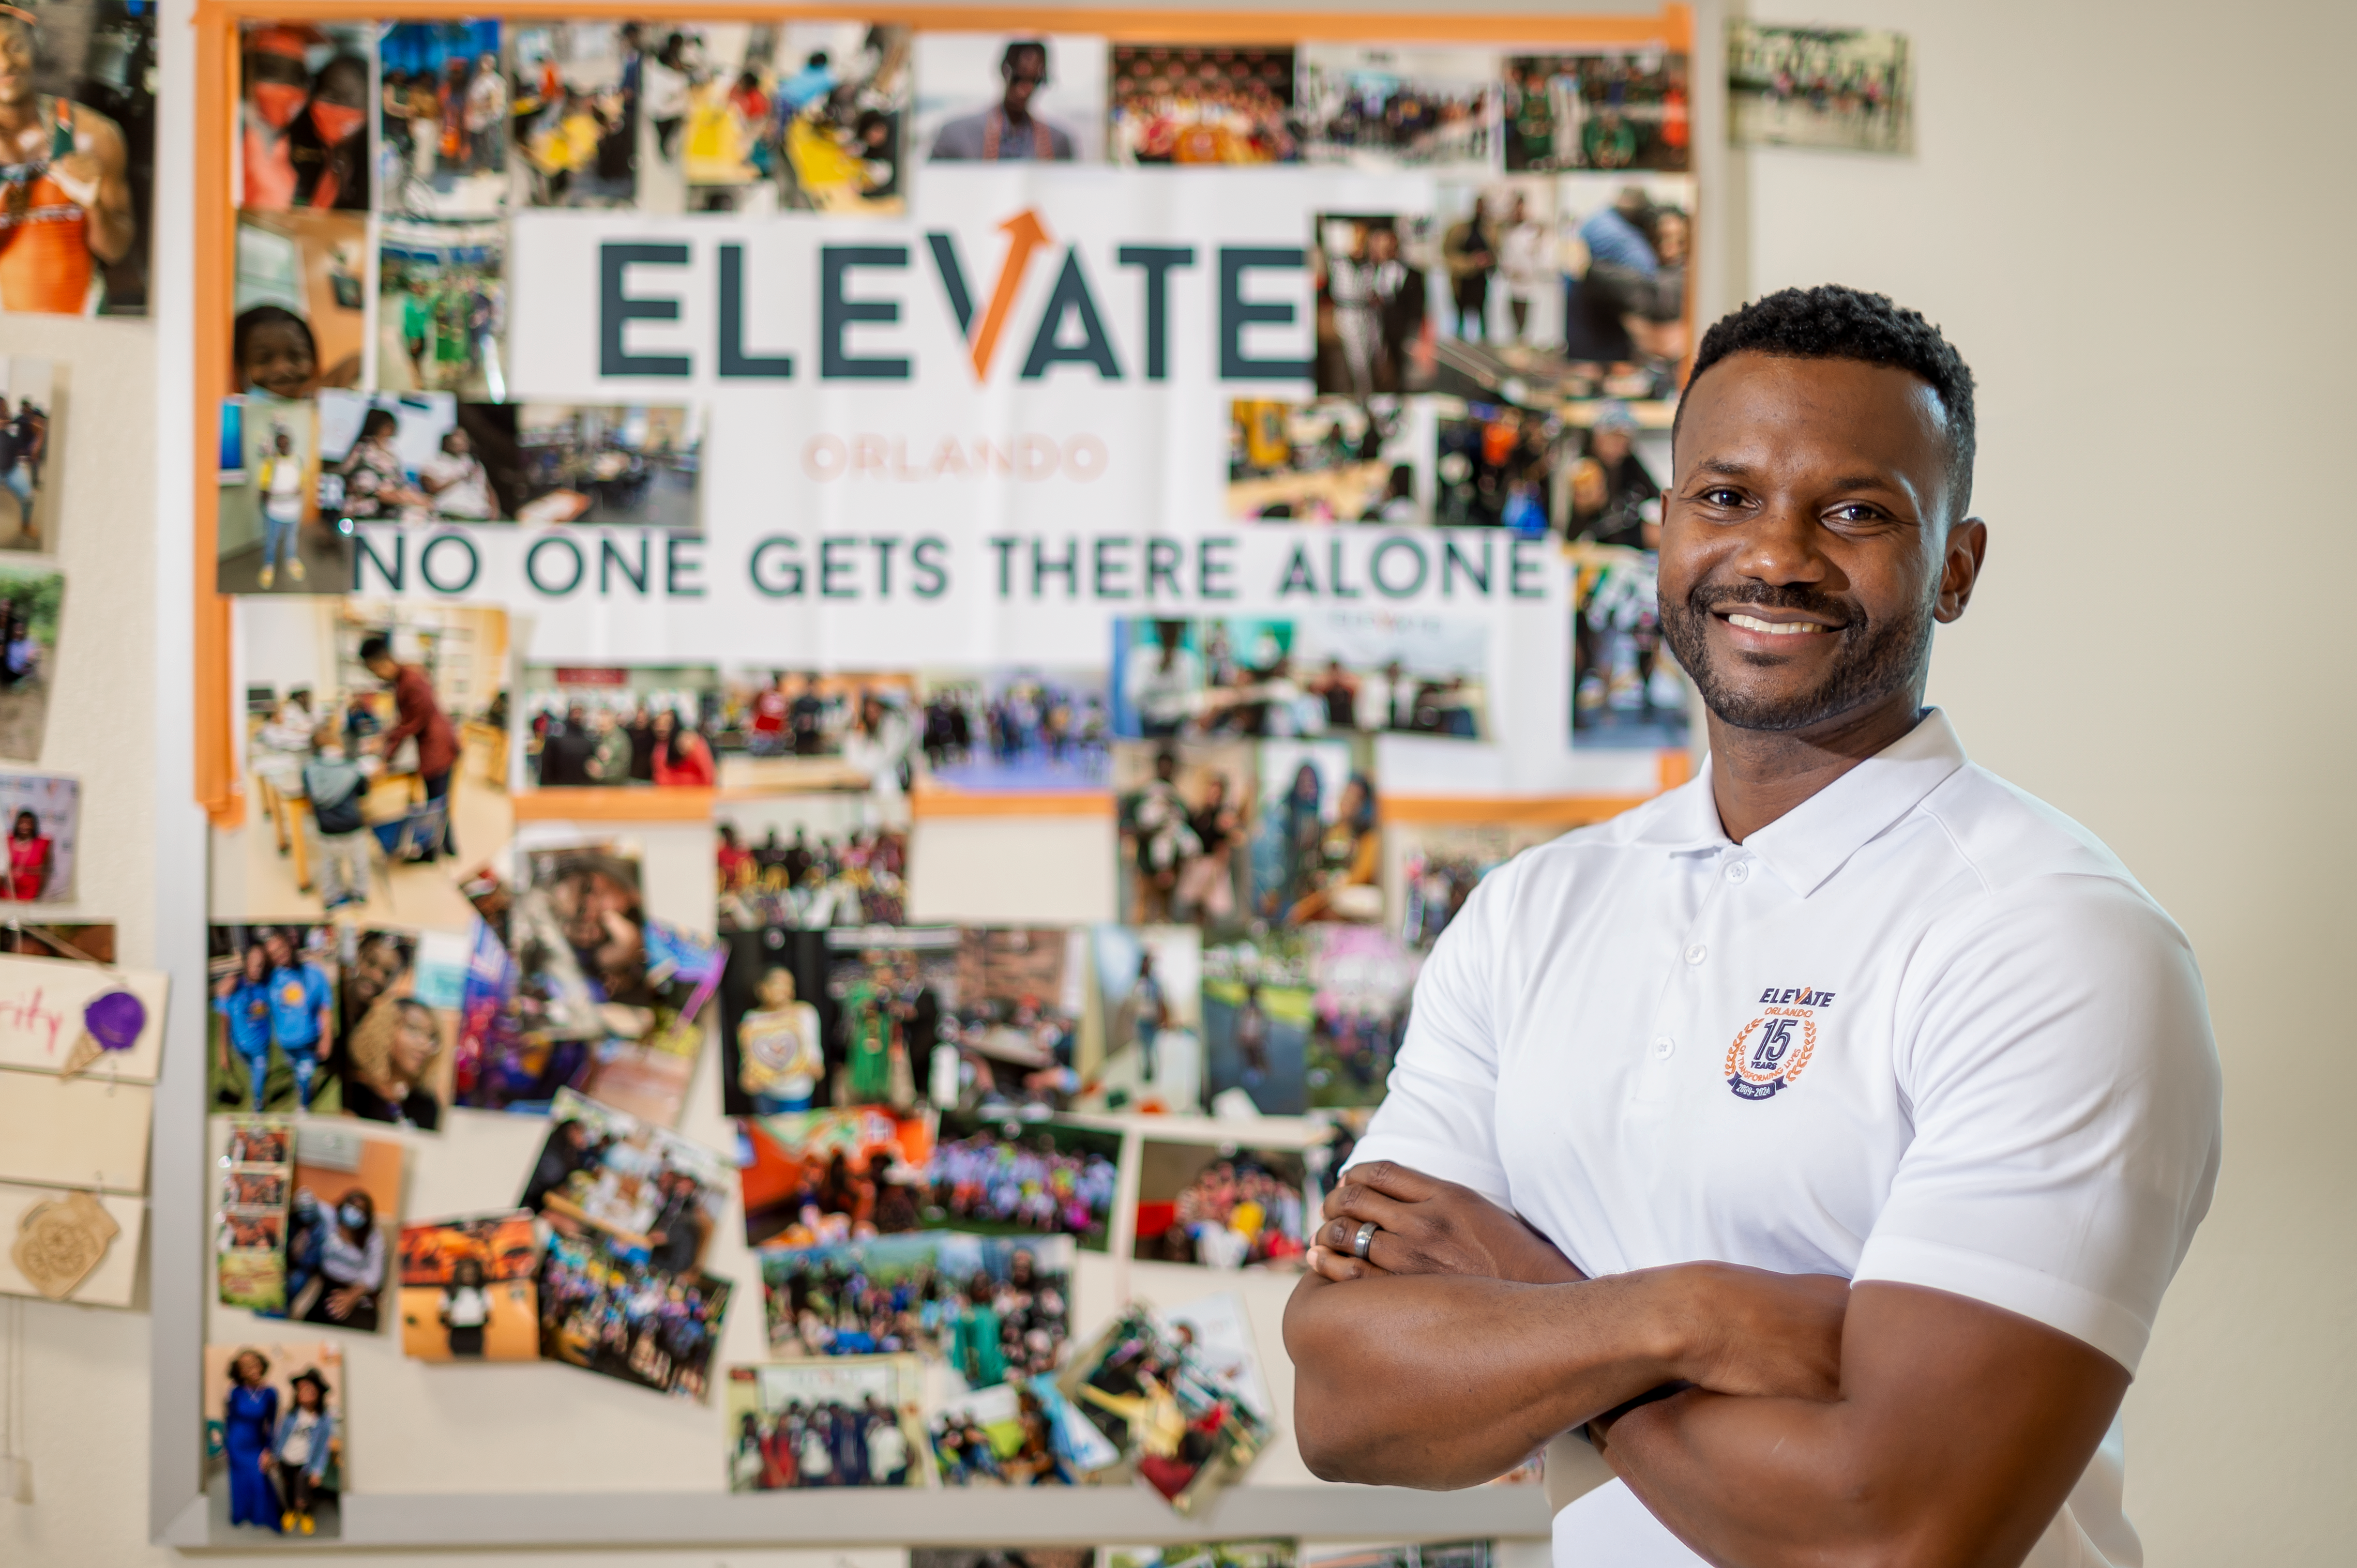 Elevate Founder stands proudly inside the organization’s center.